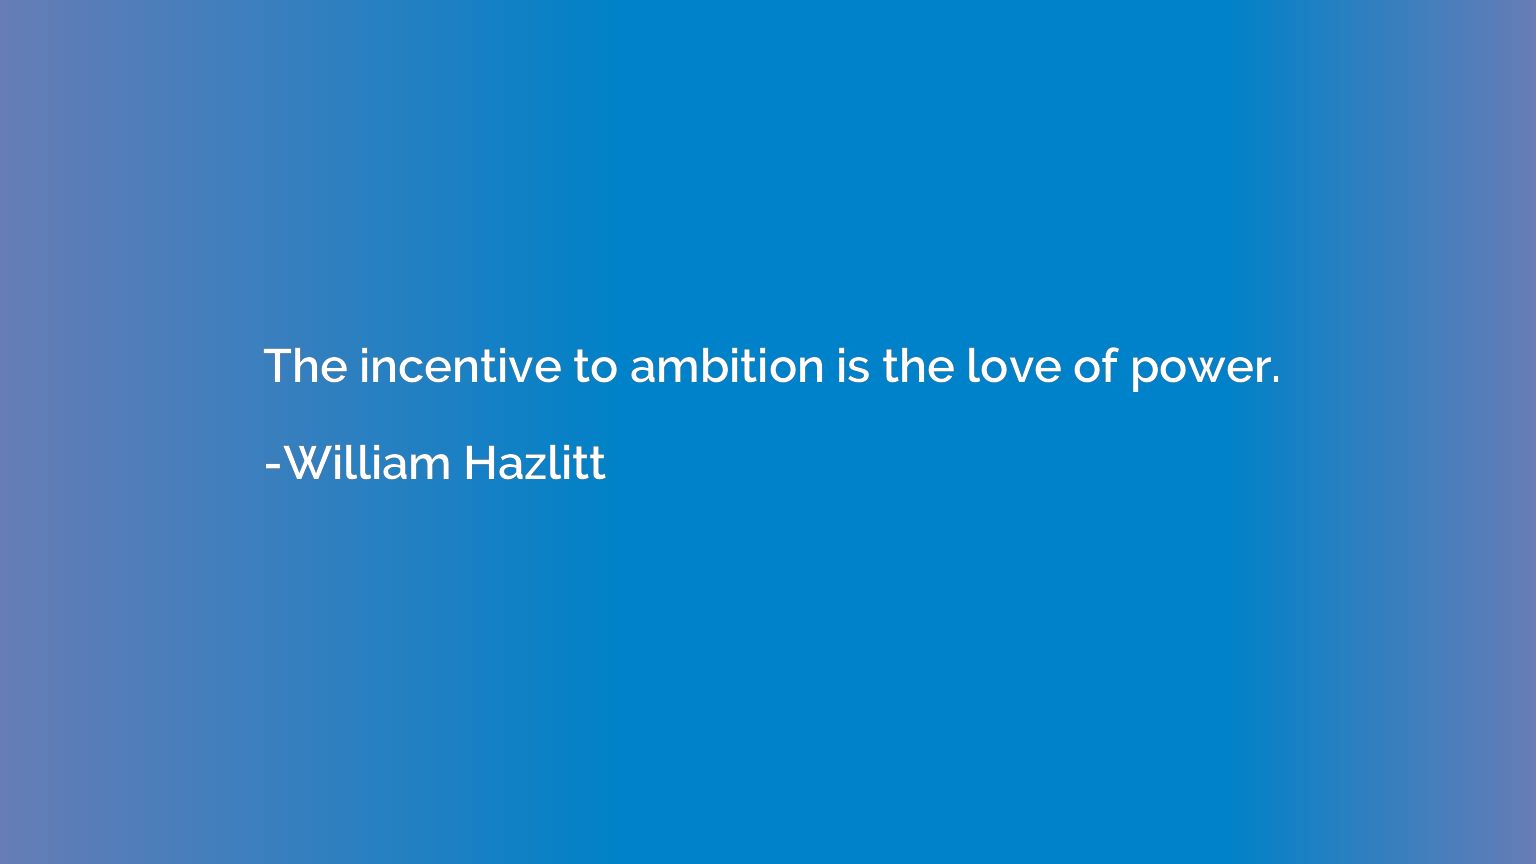 The incentive to ambition is the love of power.